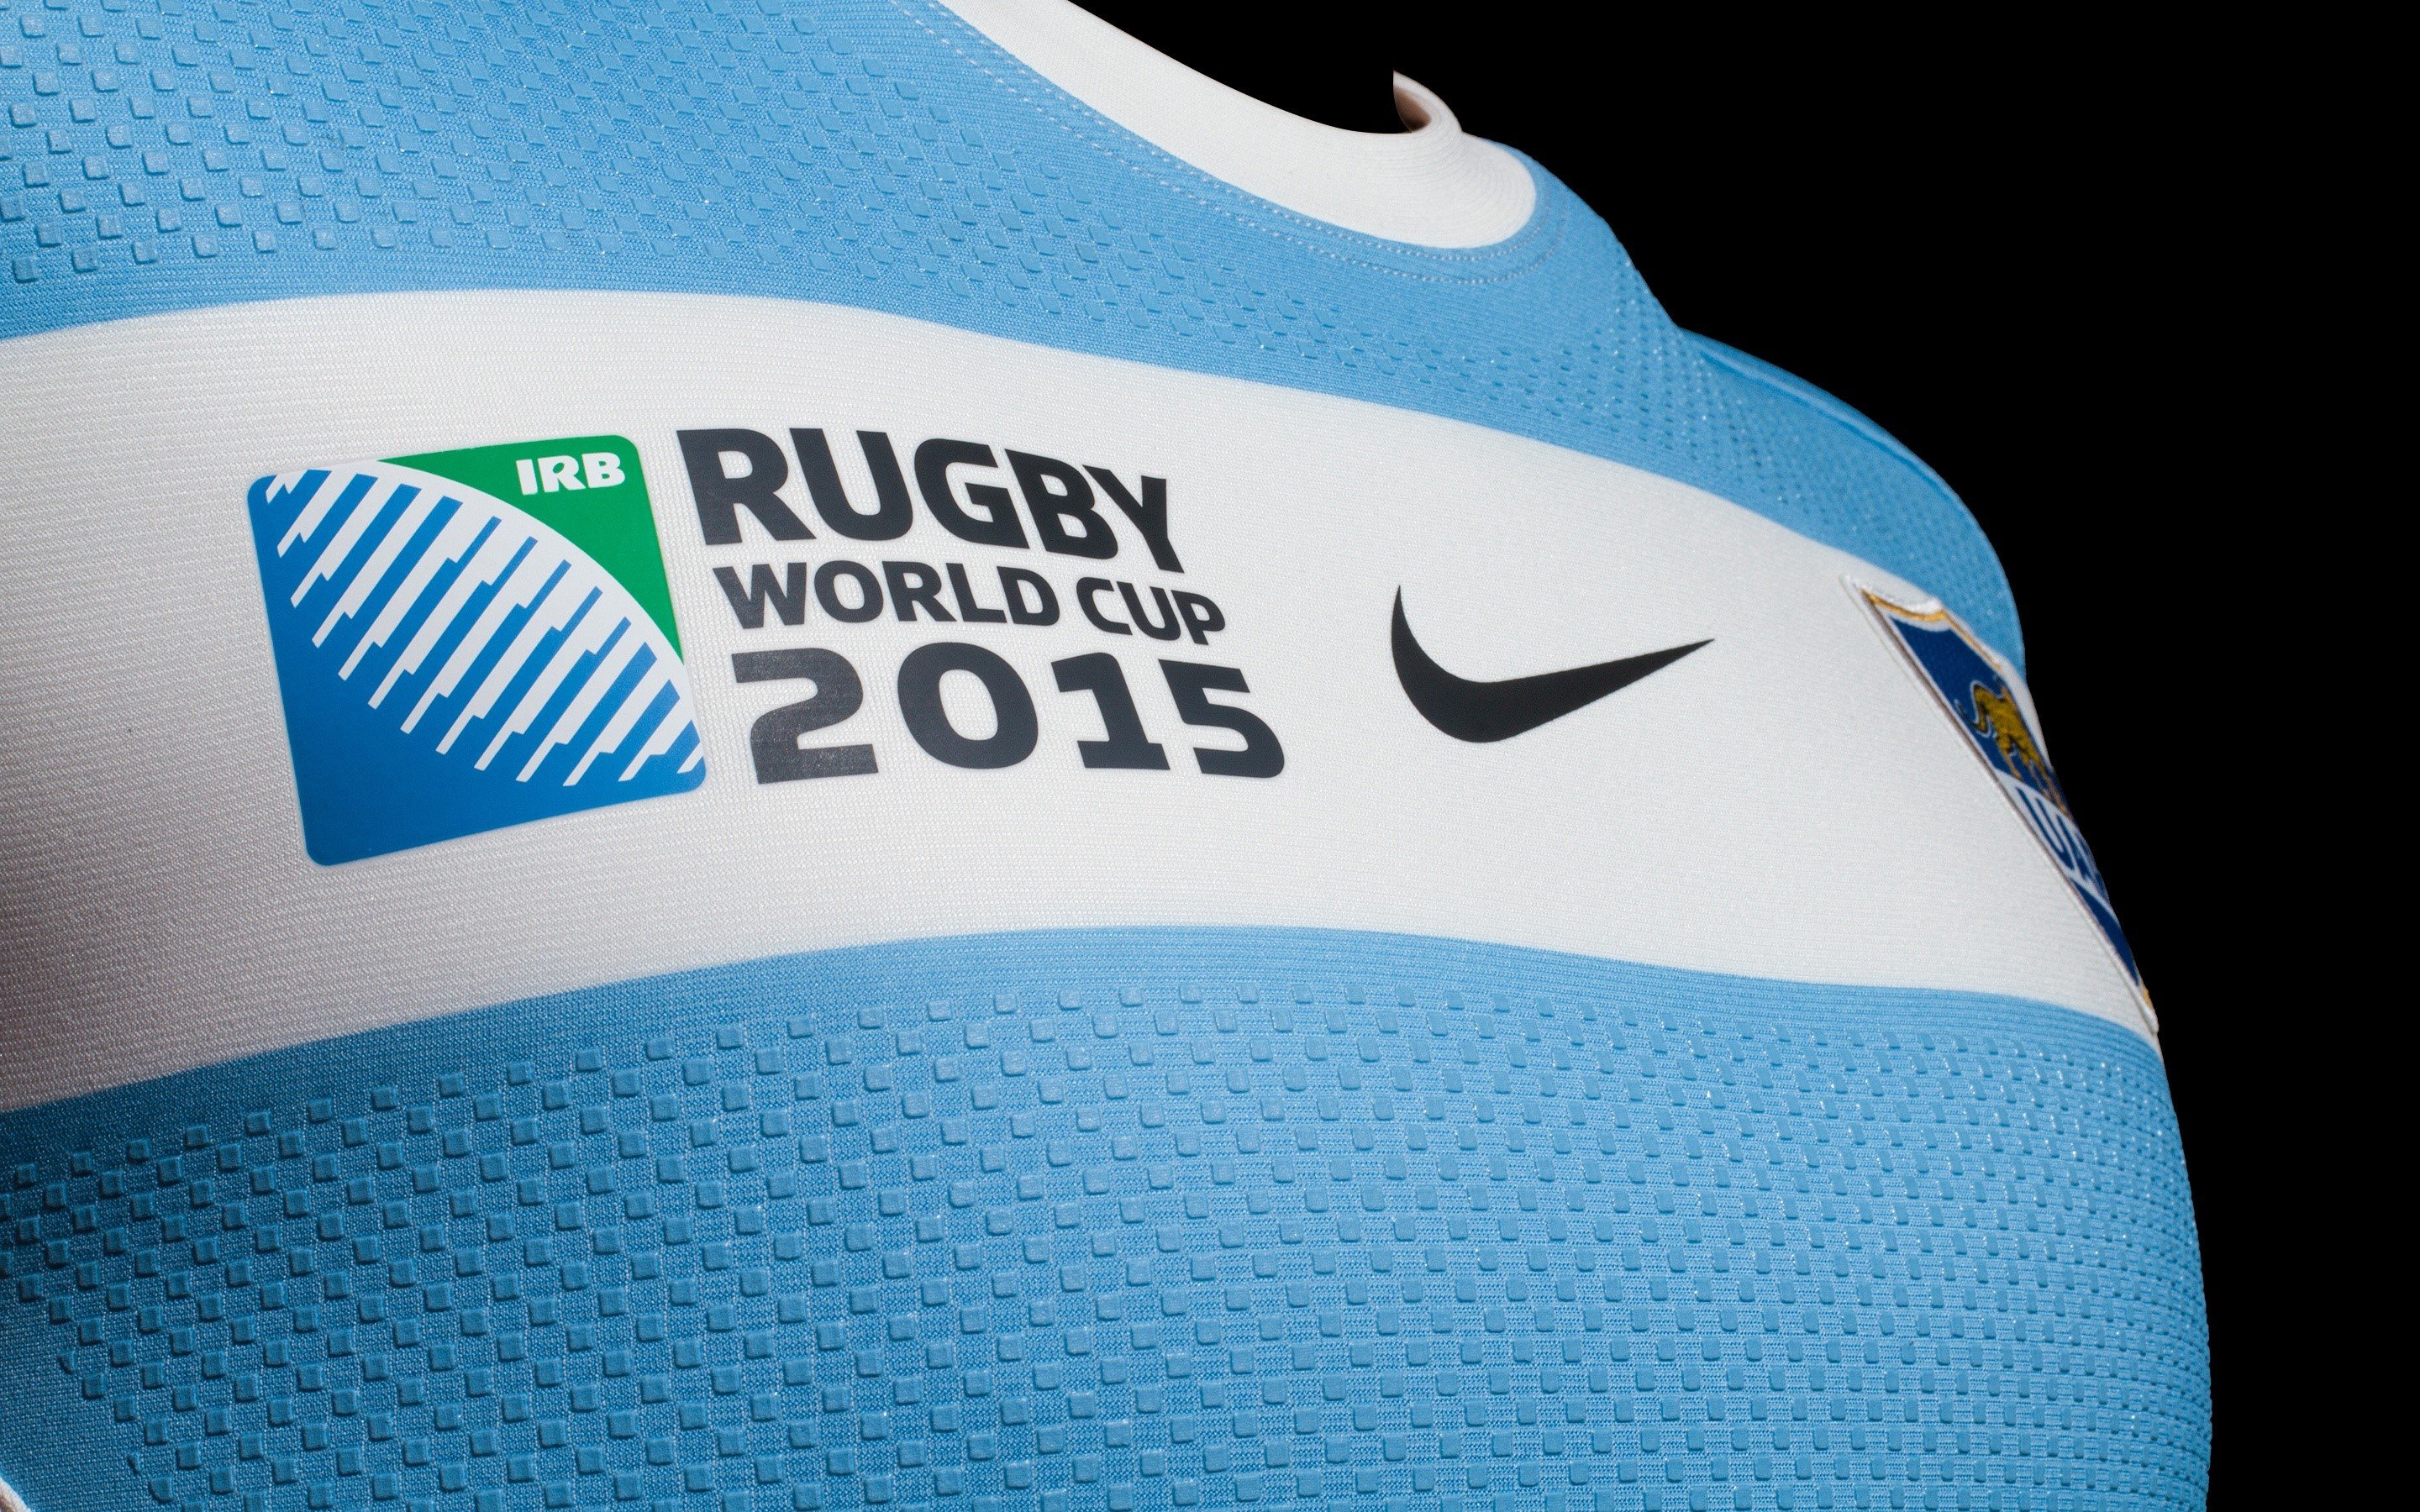 Wallpaper Rugby World Cup 2015